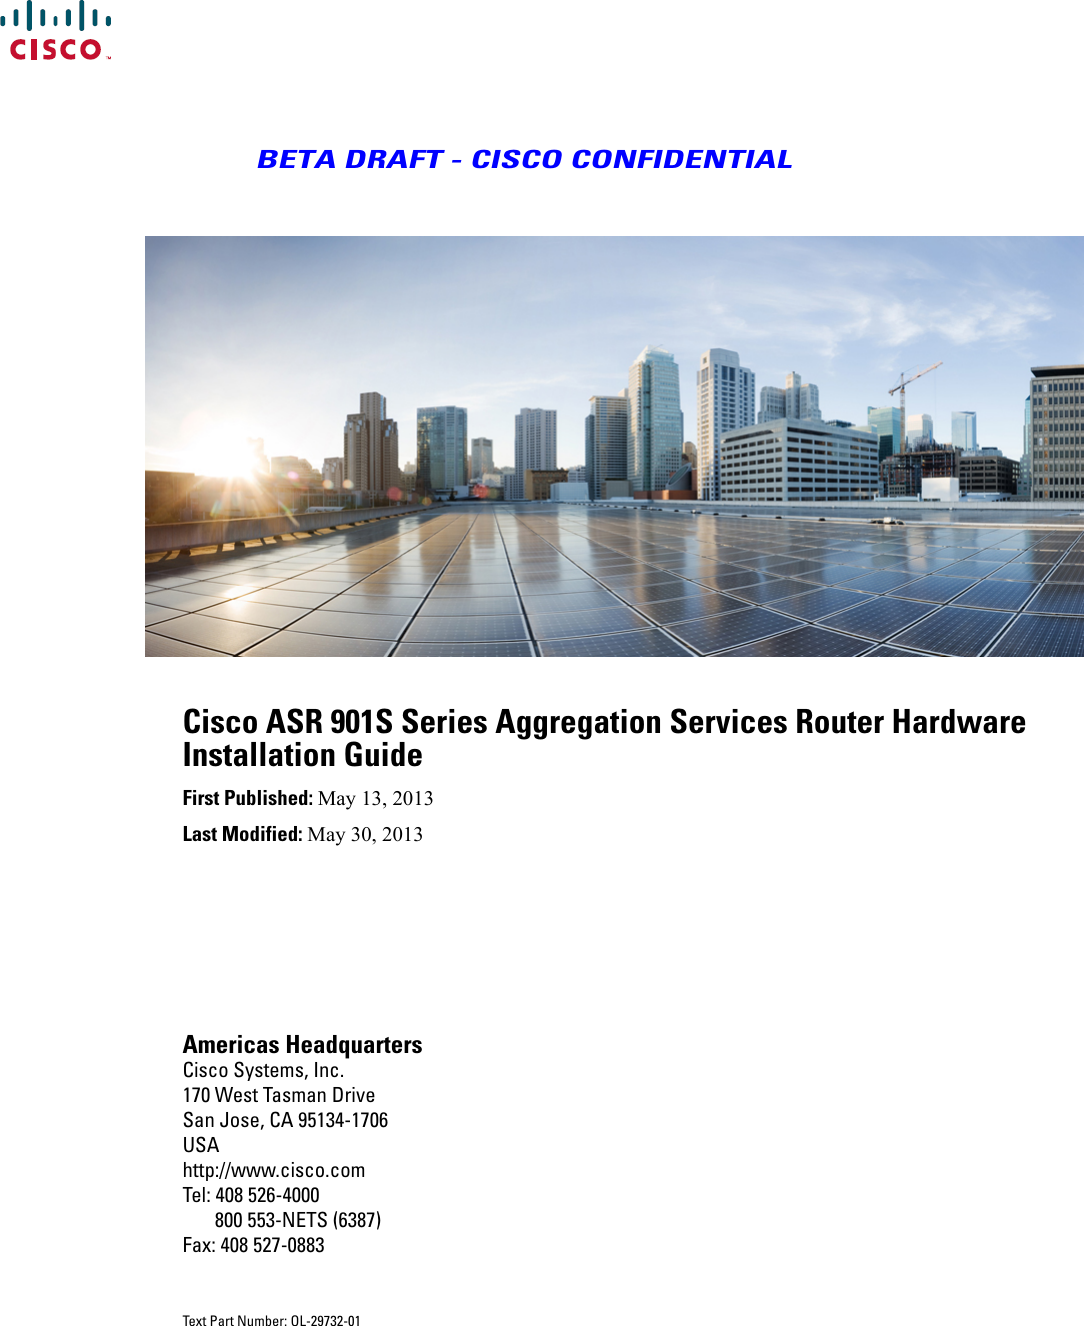 BETA DRAFT - CISCO CONFIDENTIALCisco ASR 901S Series Aggregation Services Router HardwareInstallation GuideFirst Published: May 13, 2013Last Modified: May 30, 2013Americas HeadquartersCisco Systems, Inc.170 West Tasman DriveSan Jose, CA 95134-1706USAhttp://www.cisco.comTel: 408 526-4000       800 553-NETS (6387)Fax: 408 527-0883Text Part Number: OL-29732-01